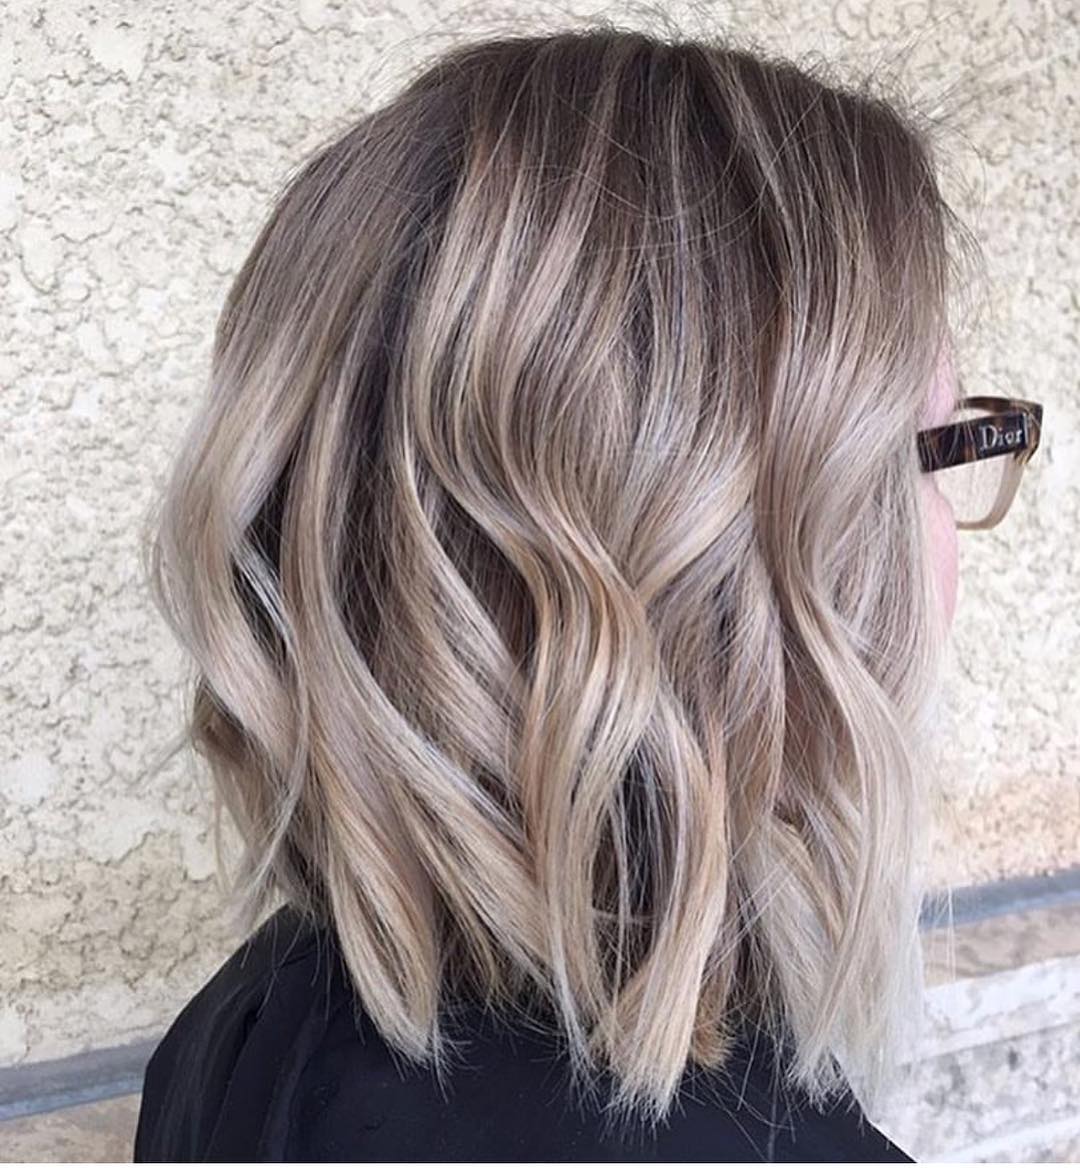 10 Balayage Ombre Hair Styles For Shoulder Length Hair